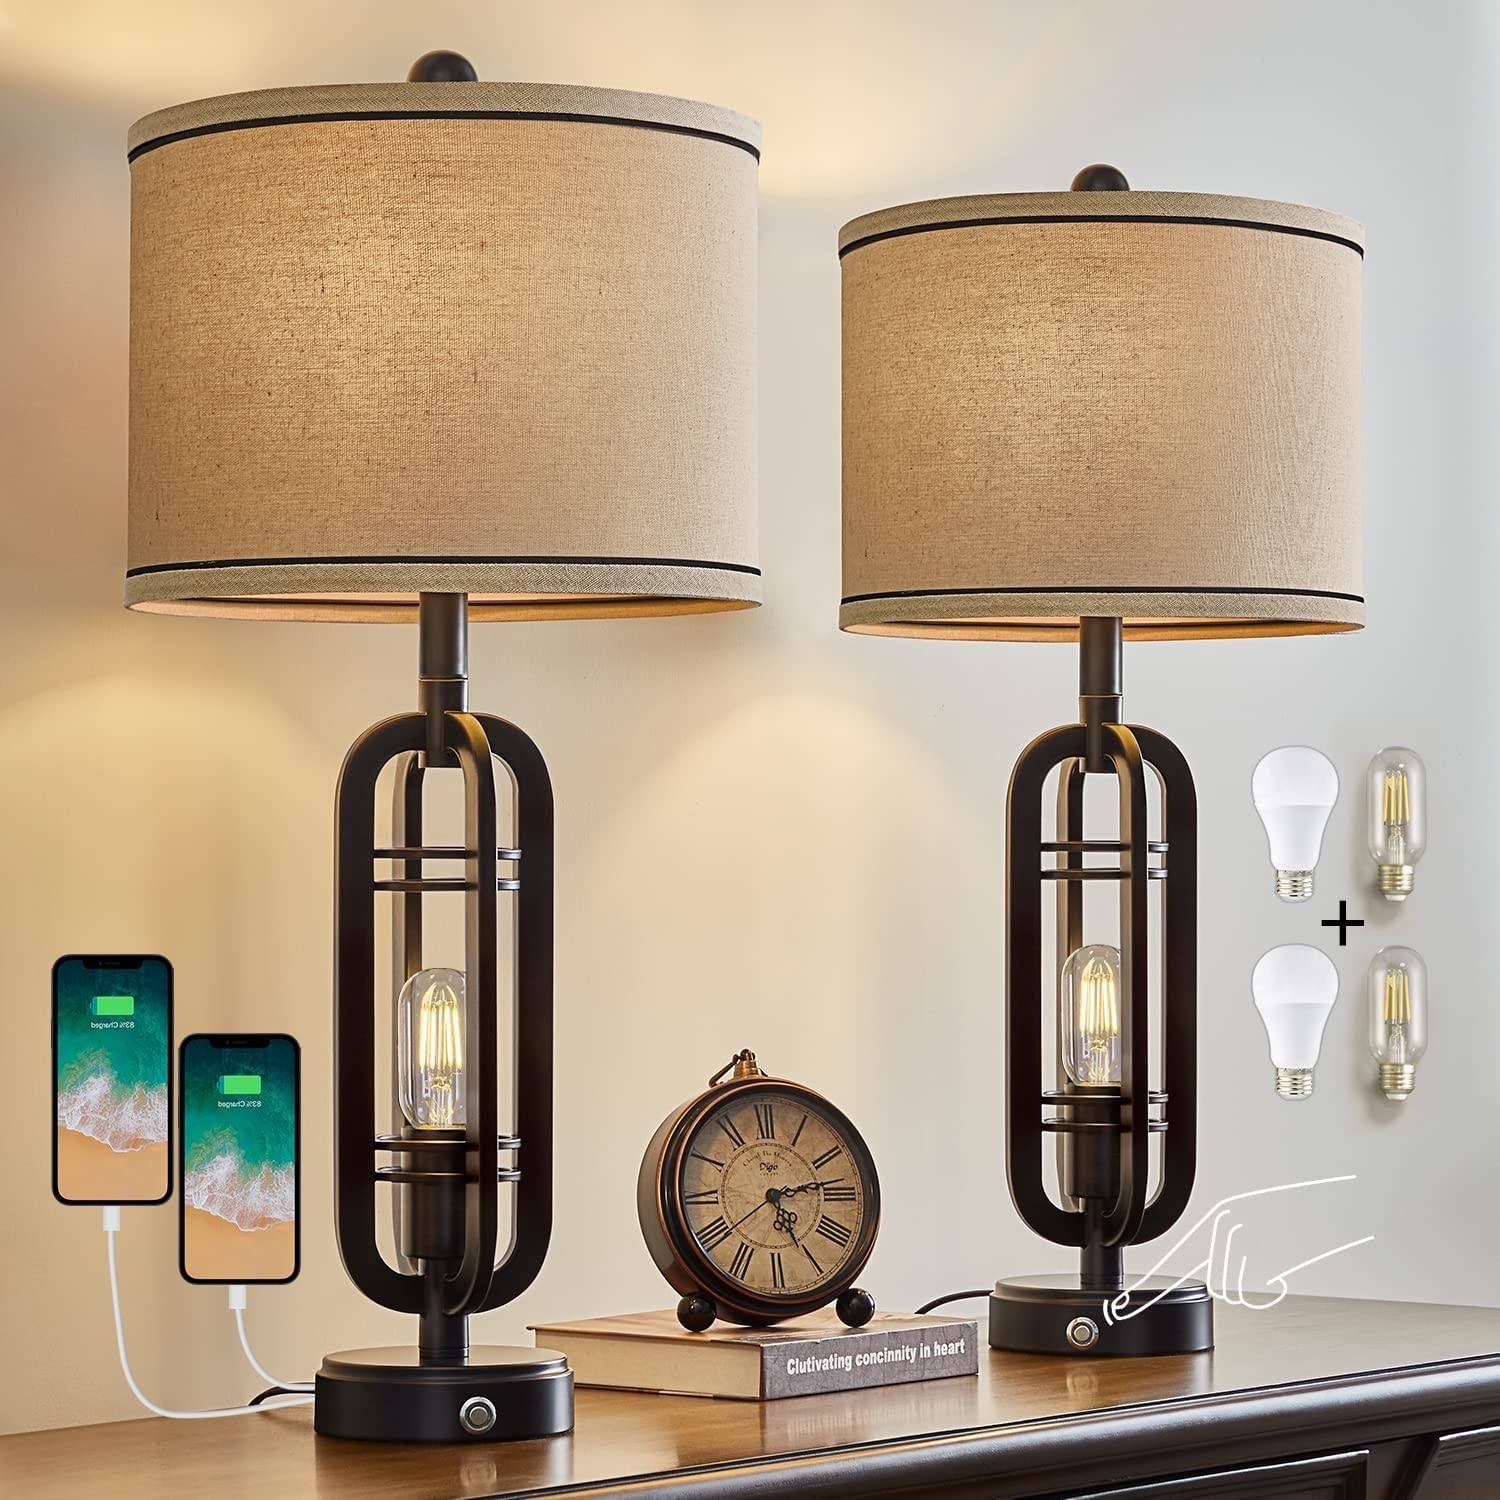 27.25 inch Industrial Table Lamp Set of with USB Ports,3 Way Dimmable  Touch Control Nightstand Lamp Vintage Modern Farmhouse Bed Bath  Beyond  37747315